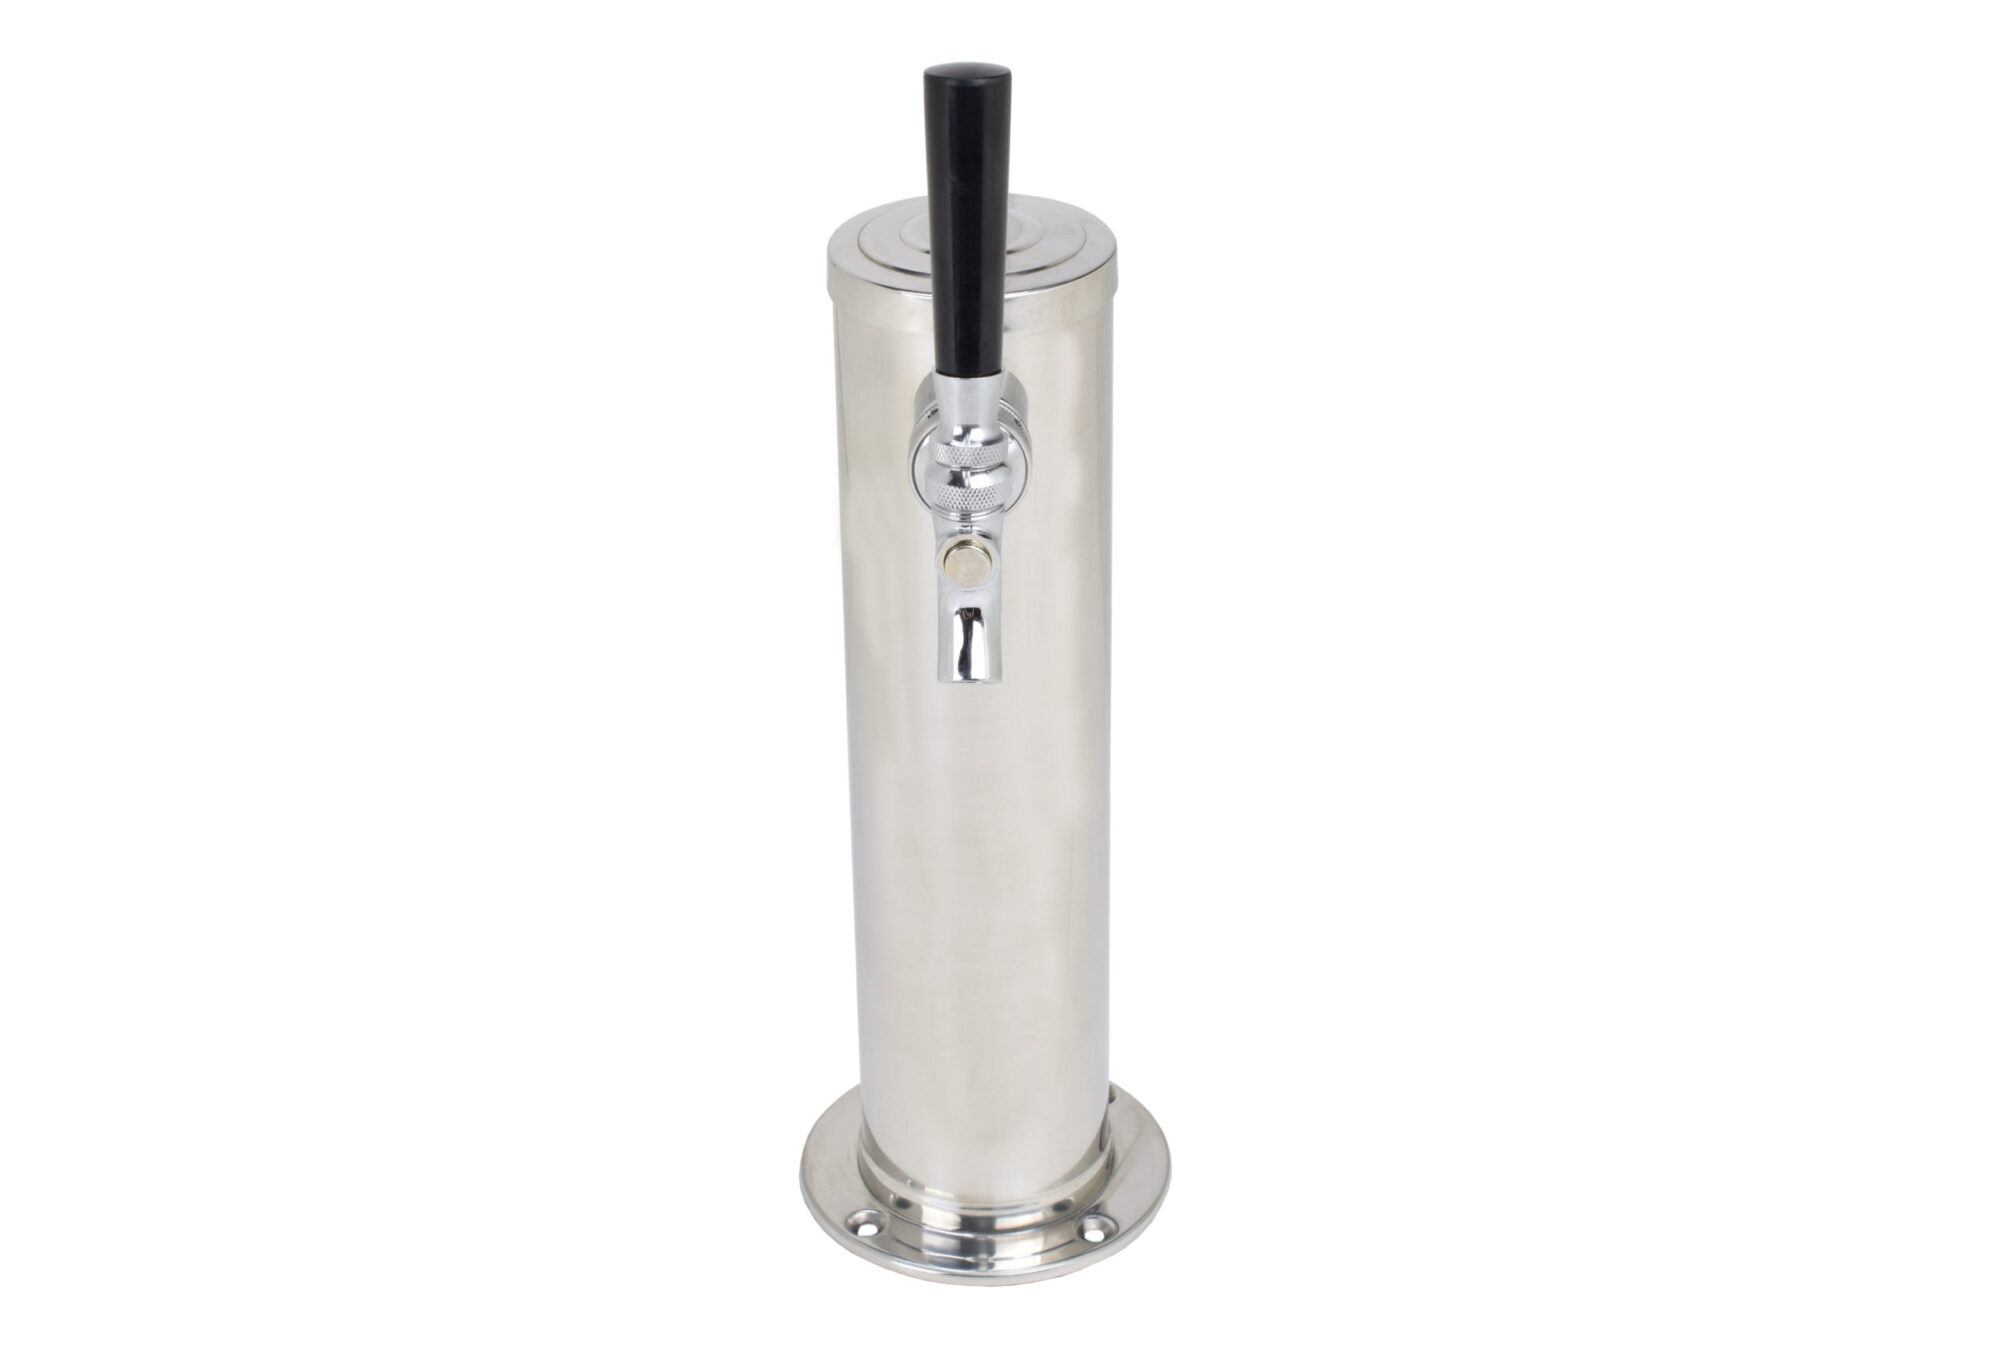 618 One Product Single Column Tower - 12" Tall